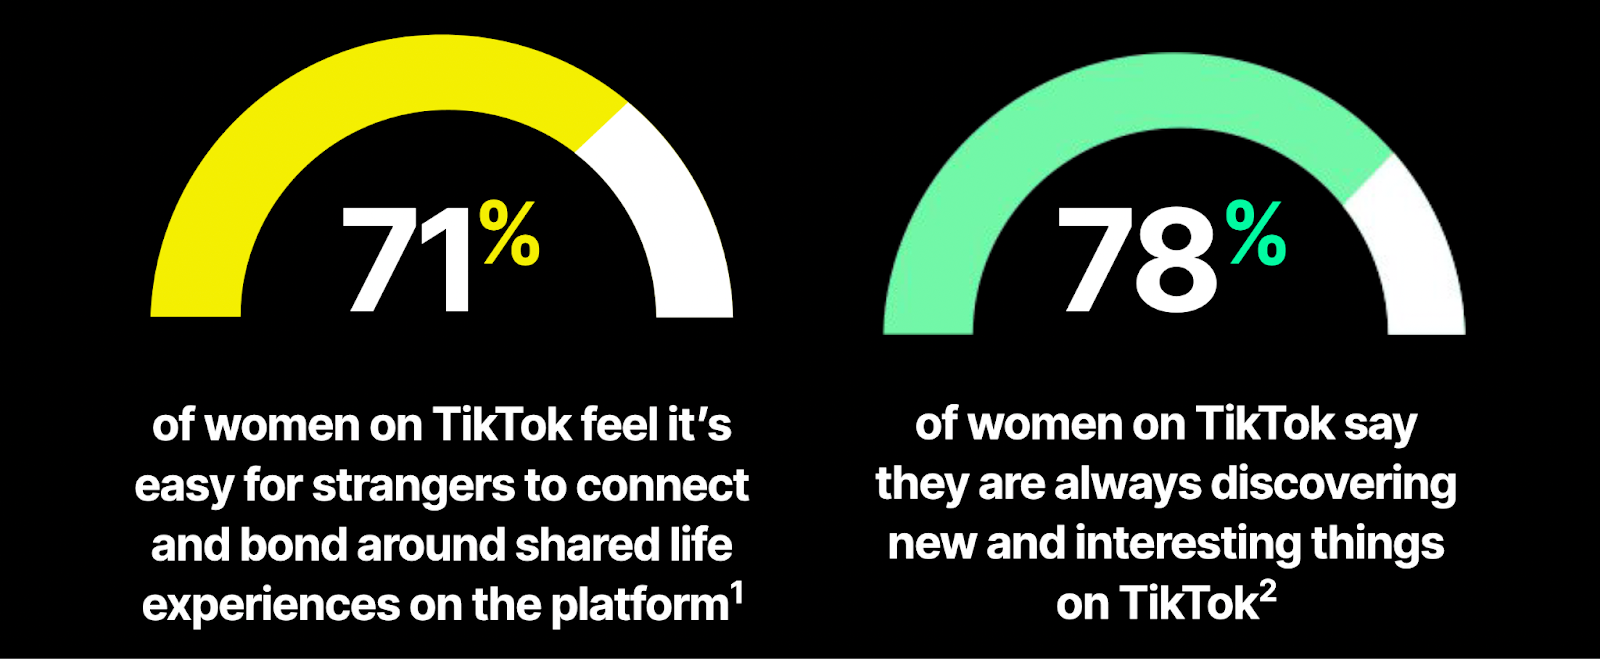 TikTok Study Reveals What "Real" Means For Women On The Platform